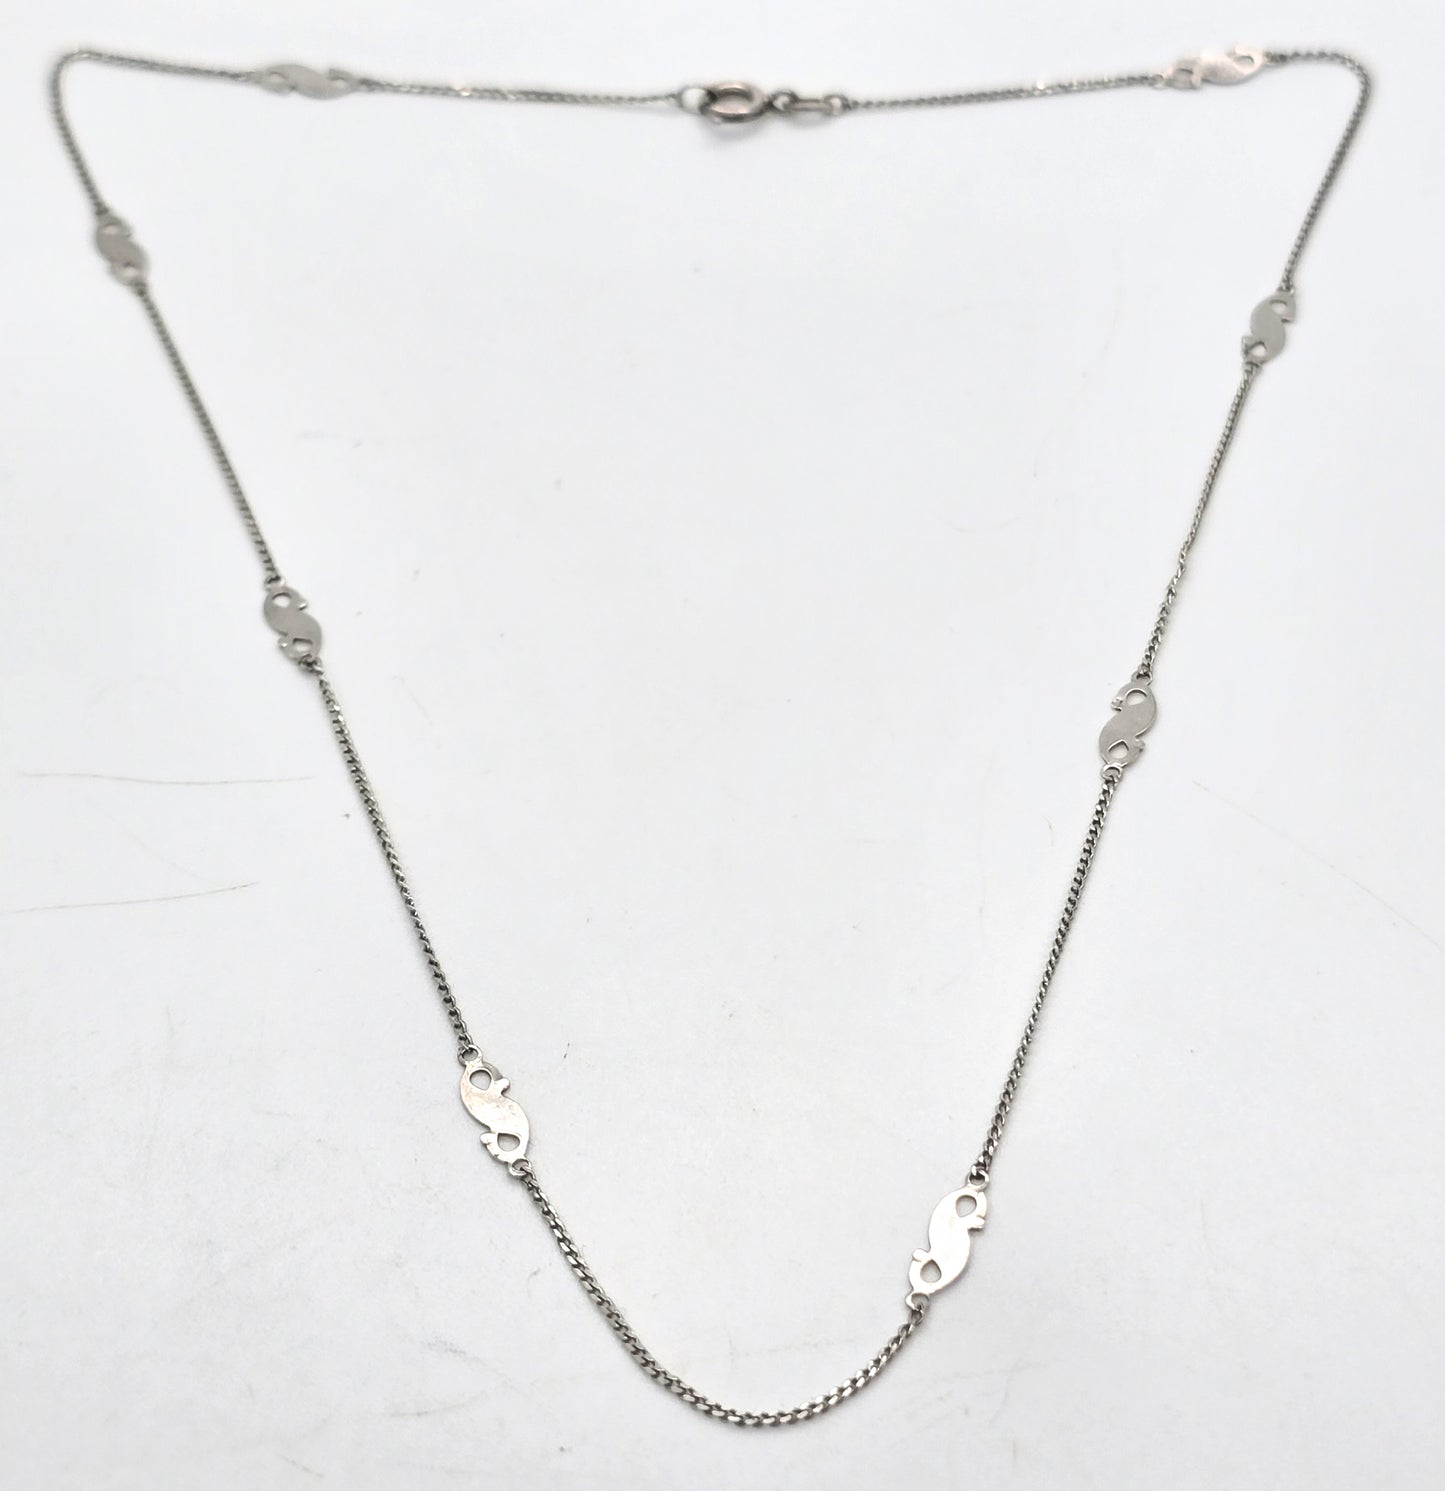 Art Deco antique 8 part stationary sterling silver 15 inch necklace